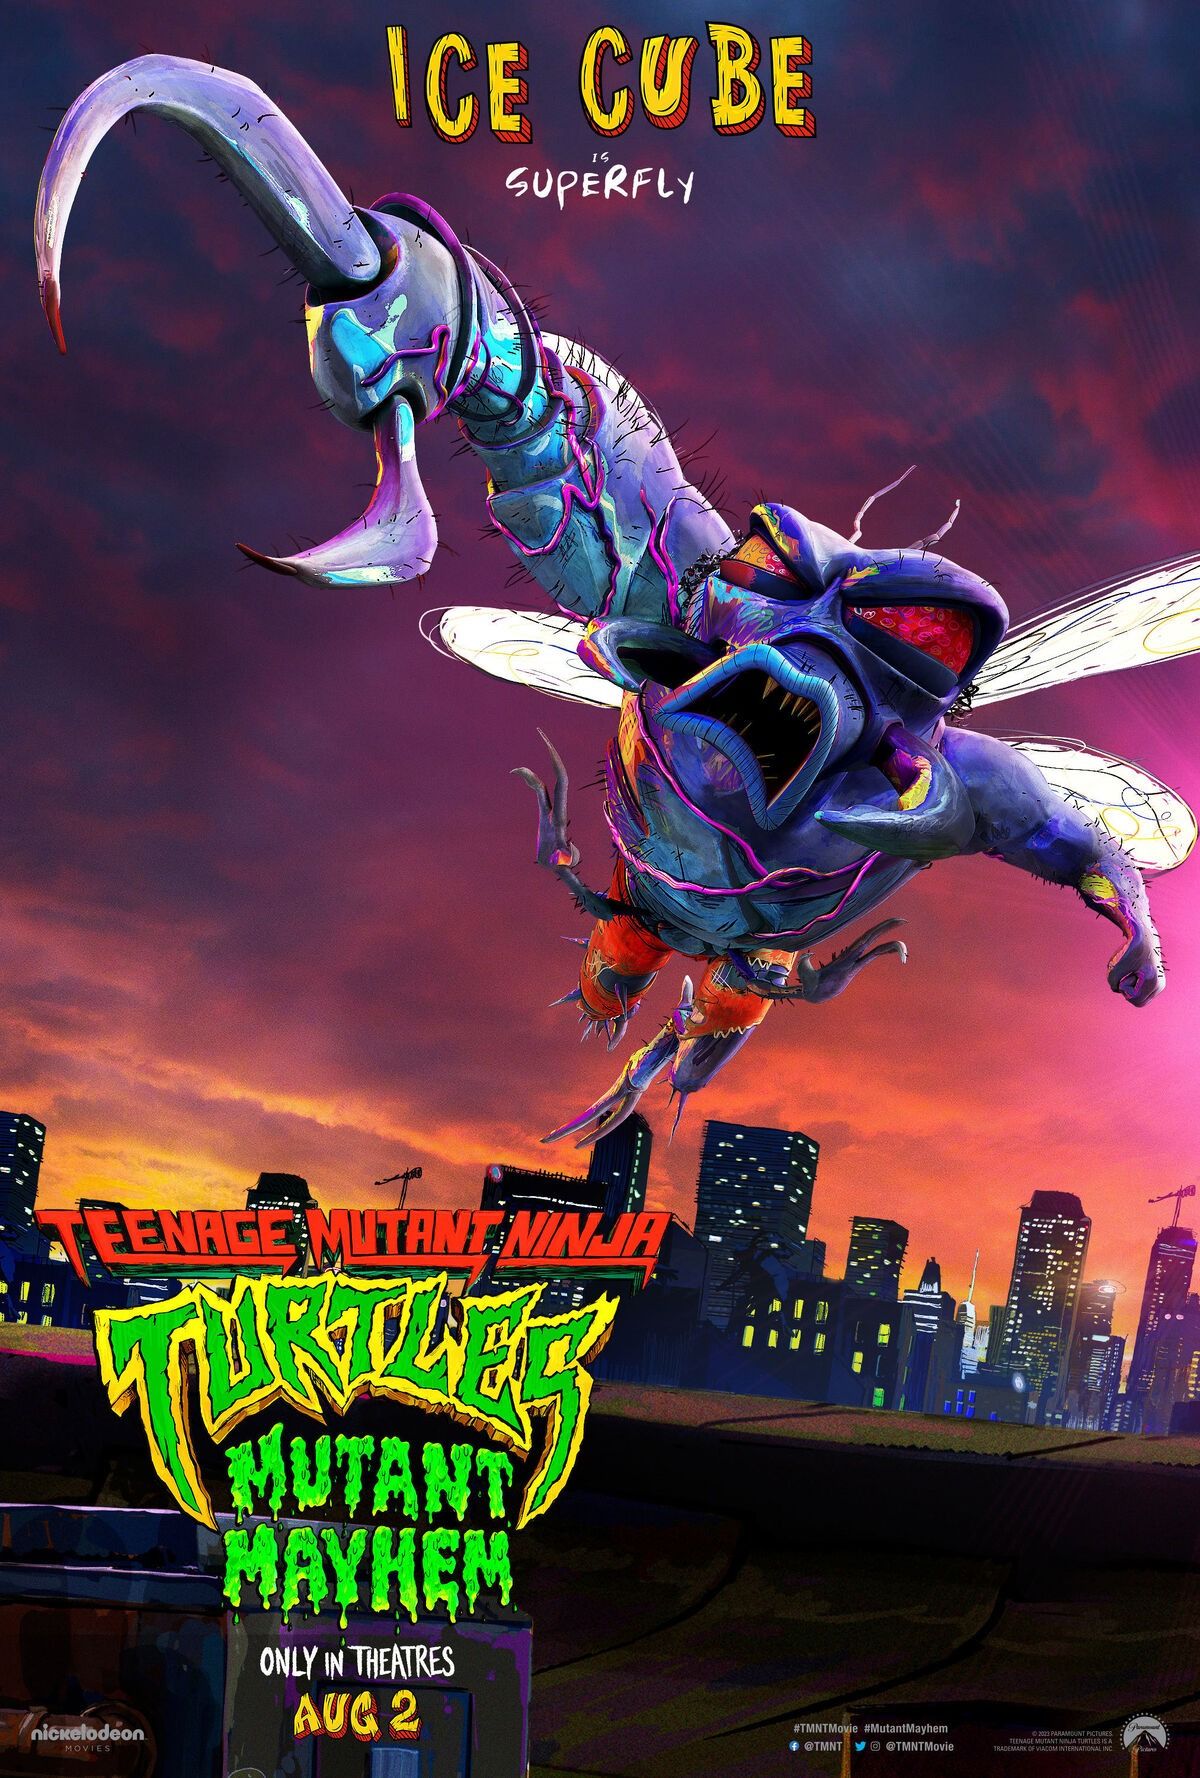 Who Are The Villains In TMNT: Mutant Mayhem?